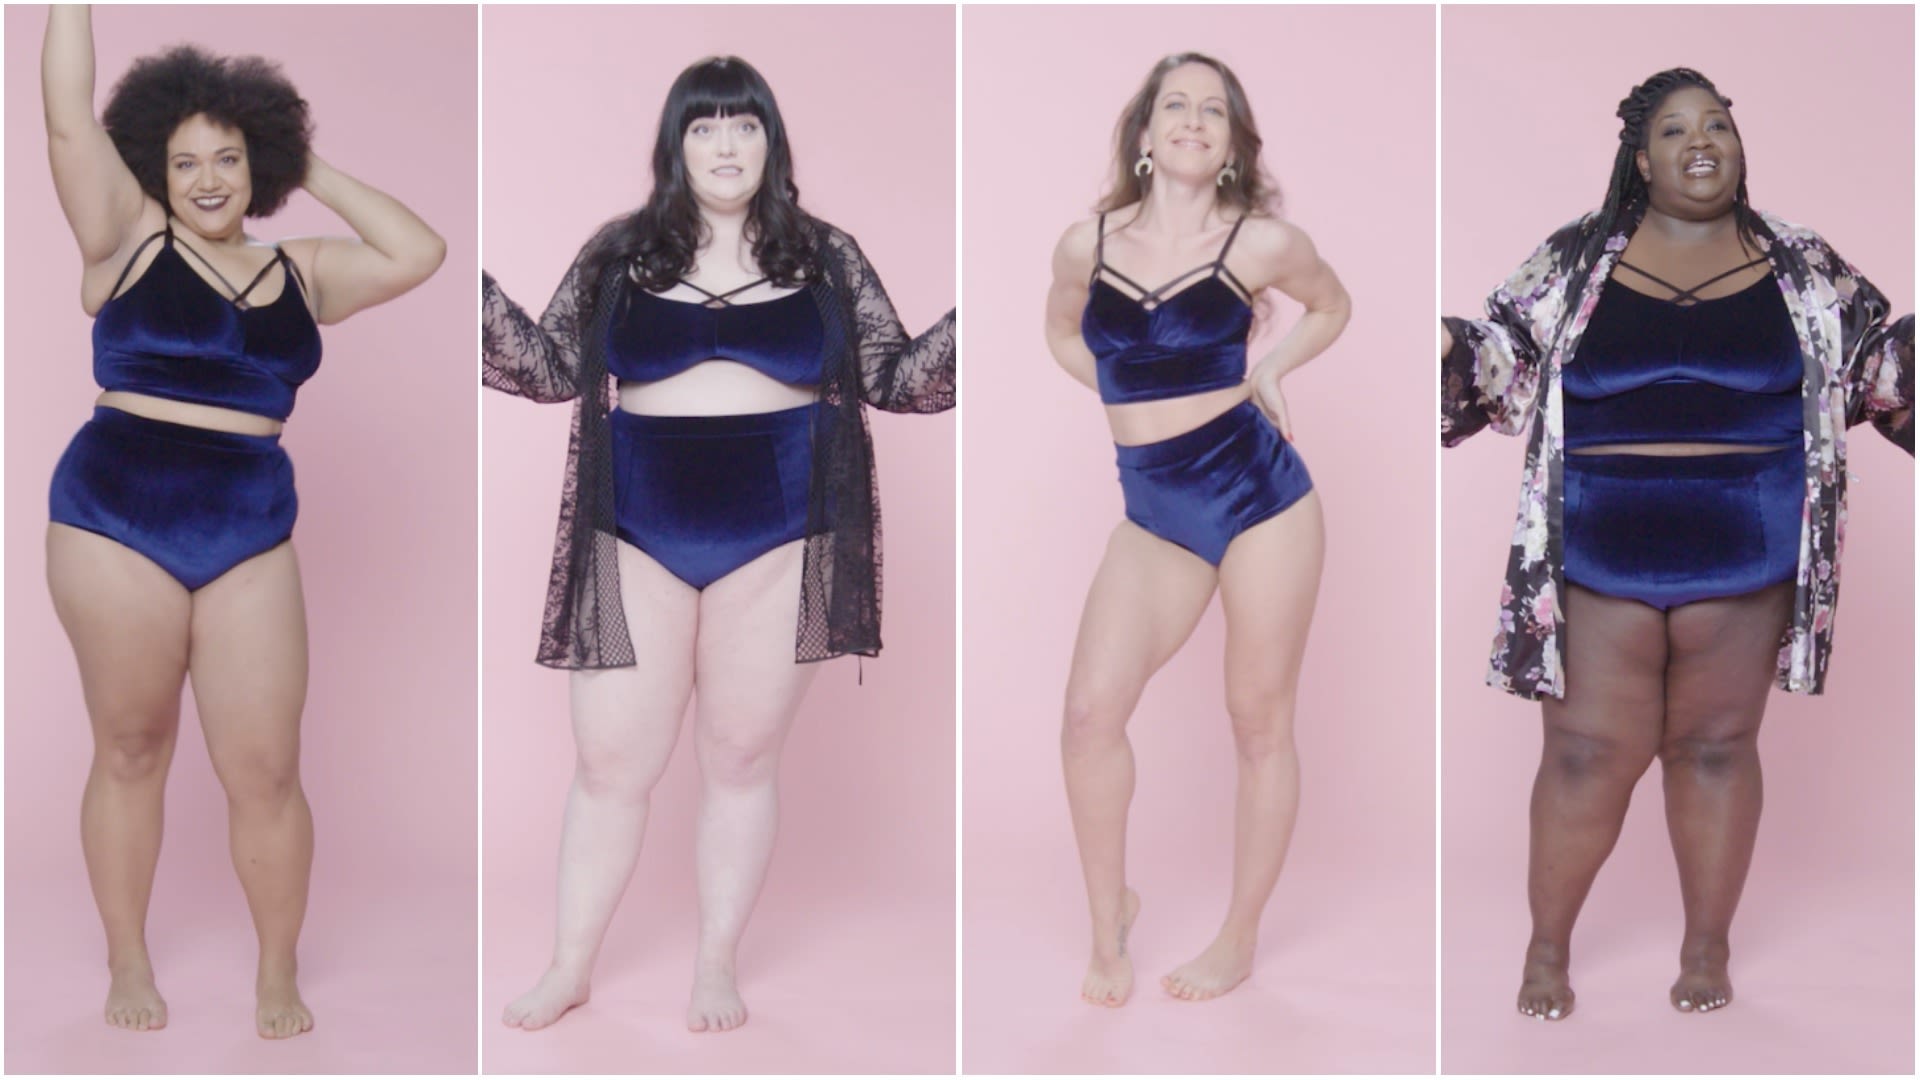 Watch Women Sizes 0 Through 26 Try on the Same Lingerie